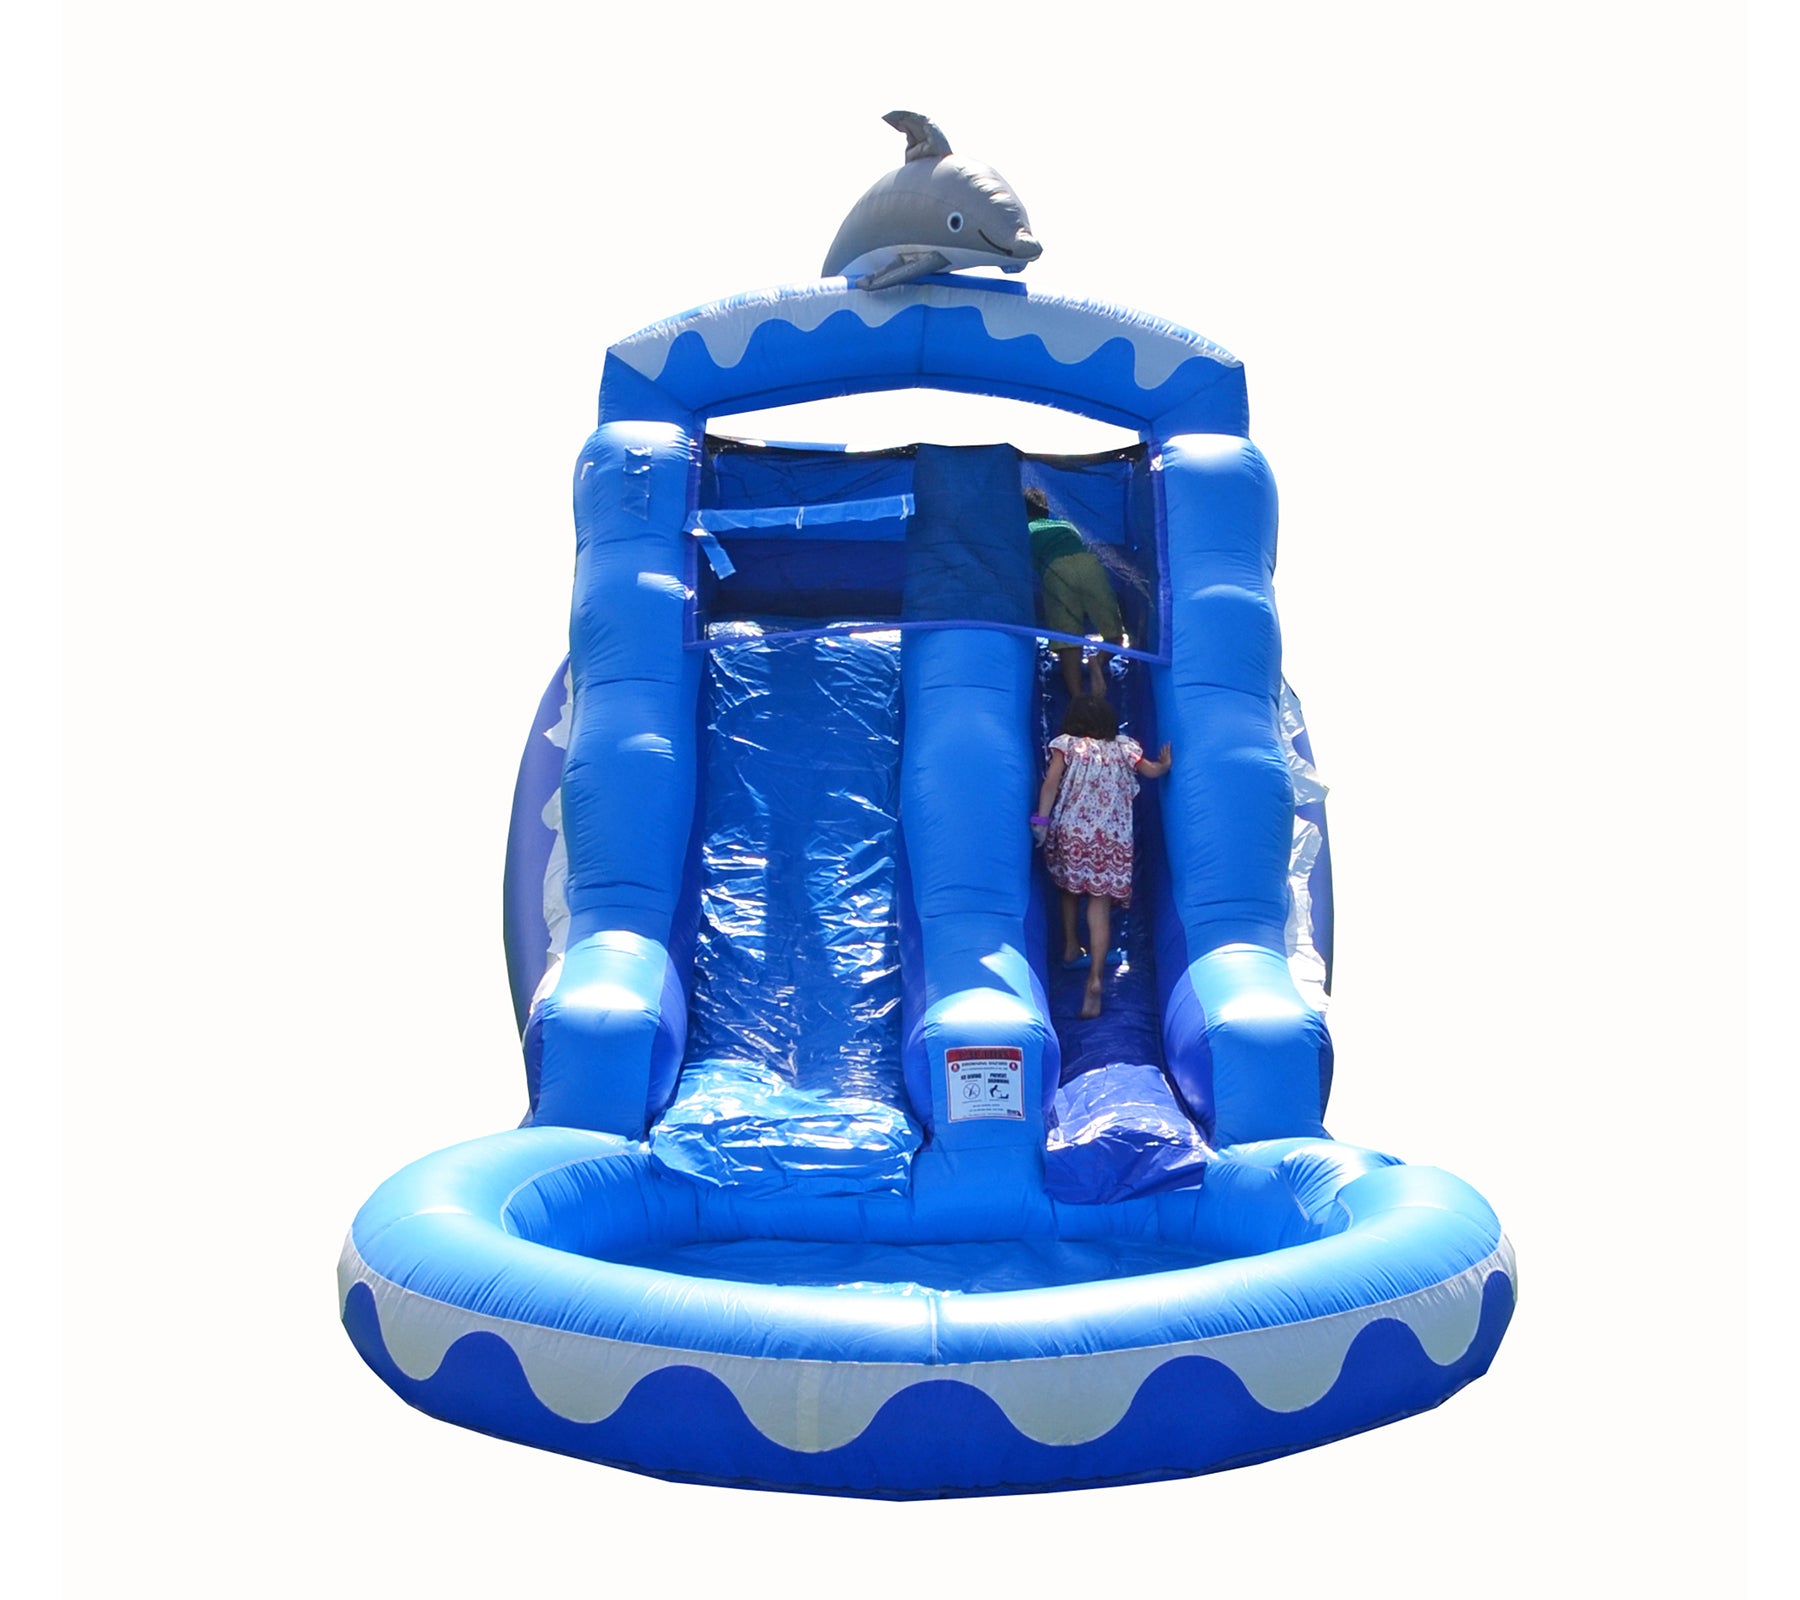 13' Dolphin Pool Slide - Bounce House Rental, Laser Tag, Water